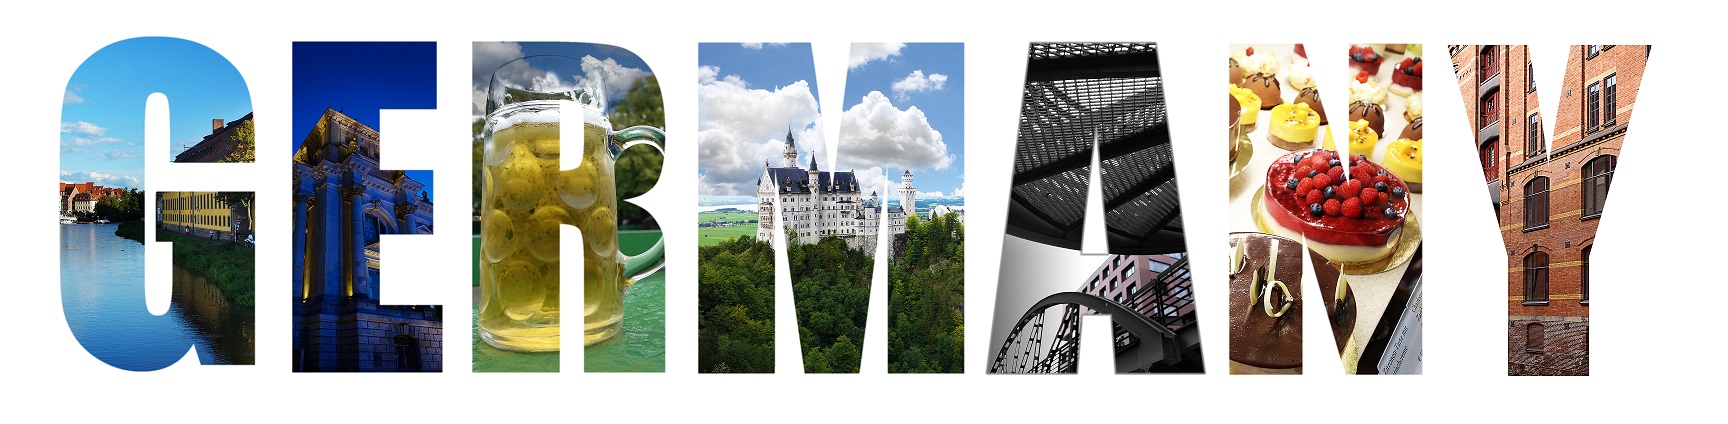 Assorted images of Germany in collage over white background